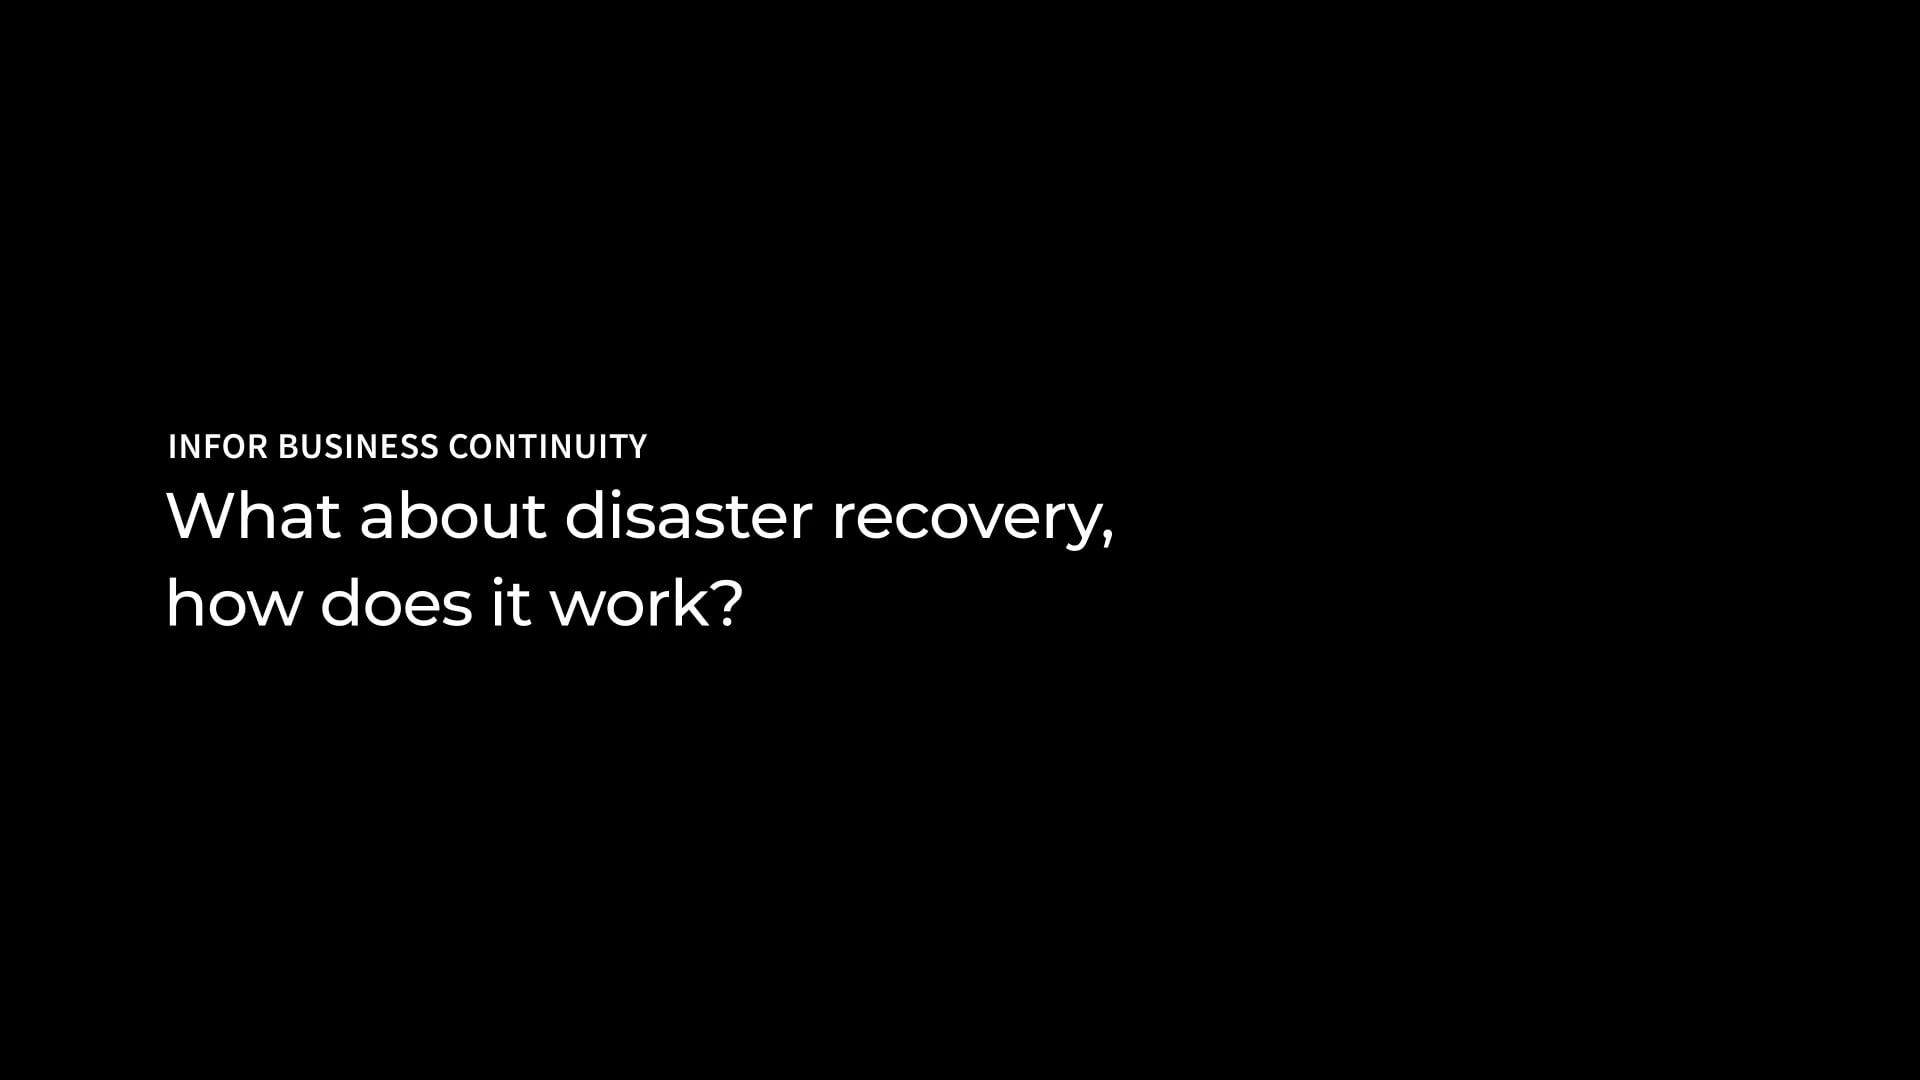 021_065_Disaster_Recovery_D01_JC062321.mp4